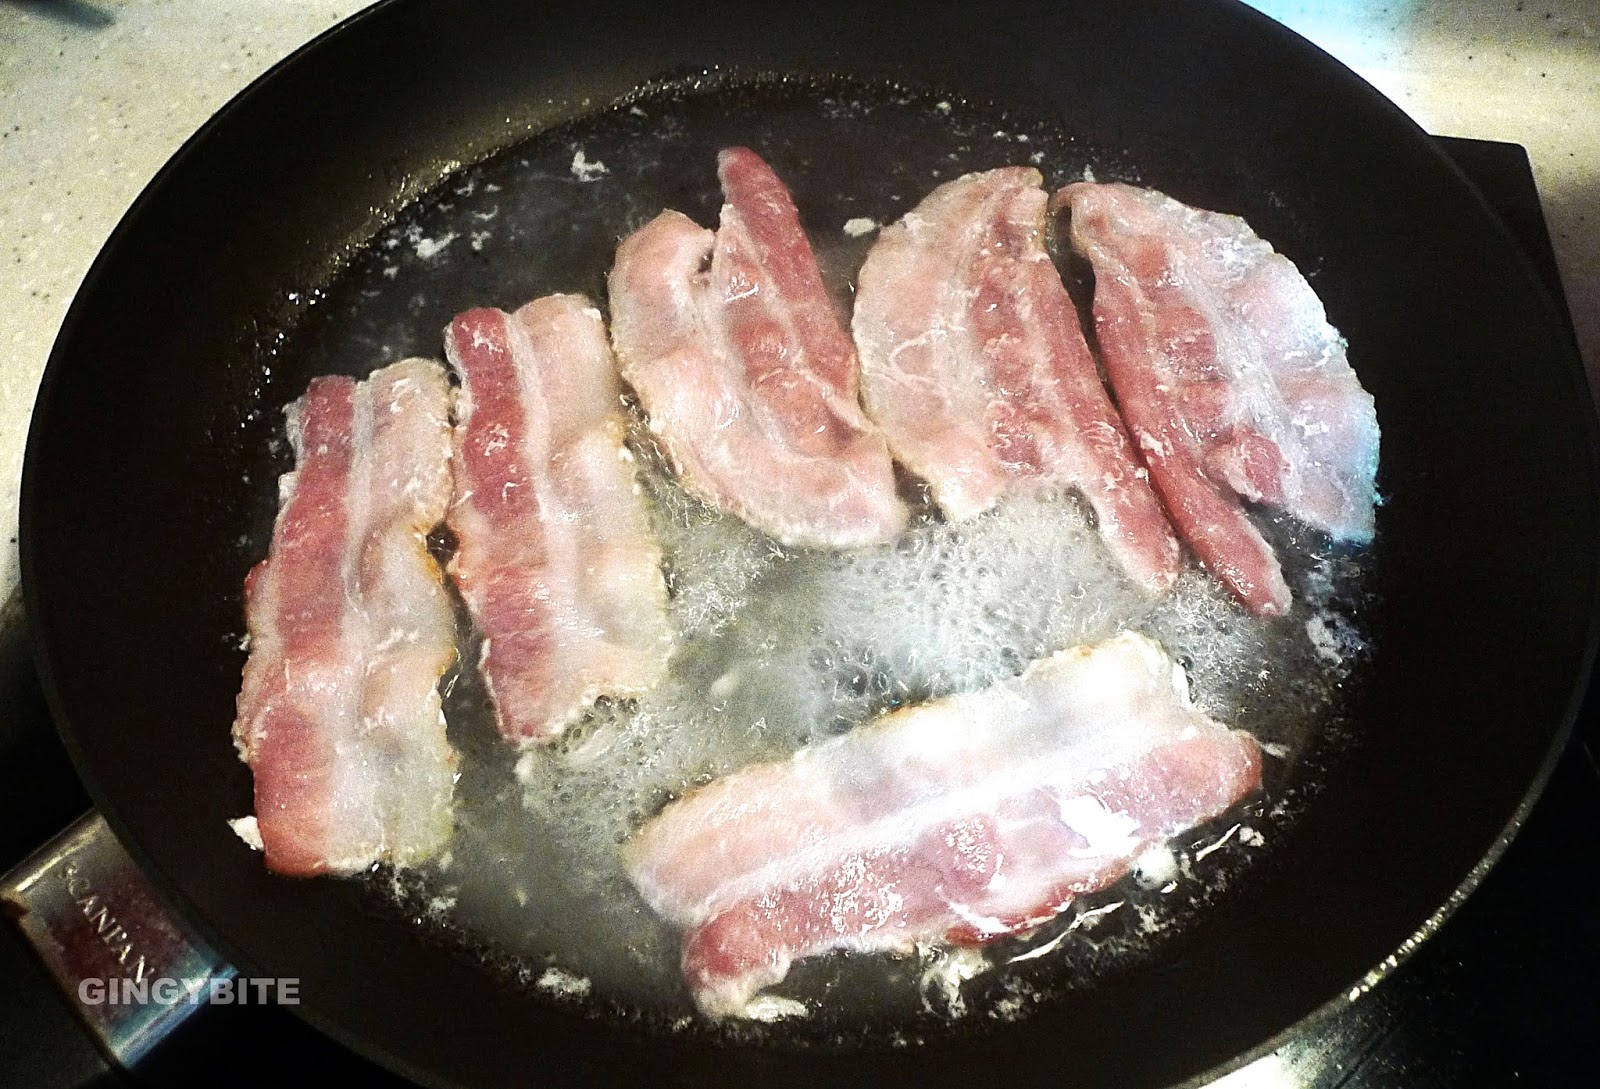 How to fry crispy bacon easily with water